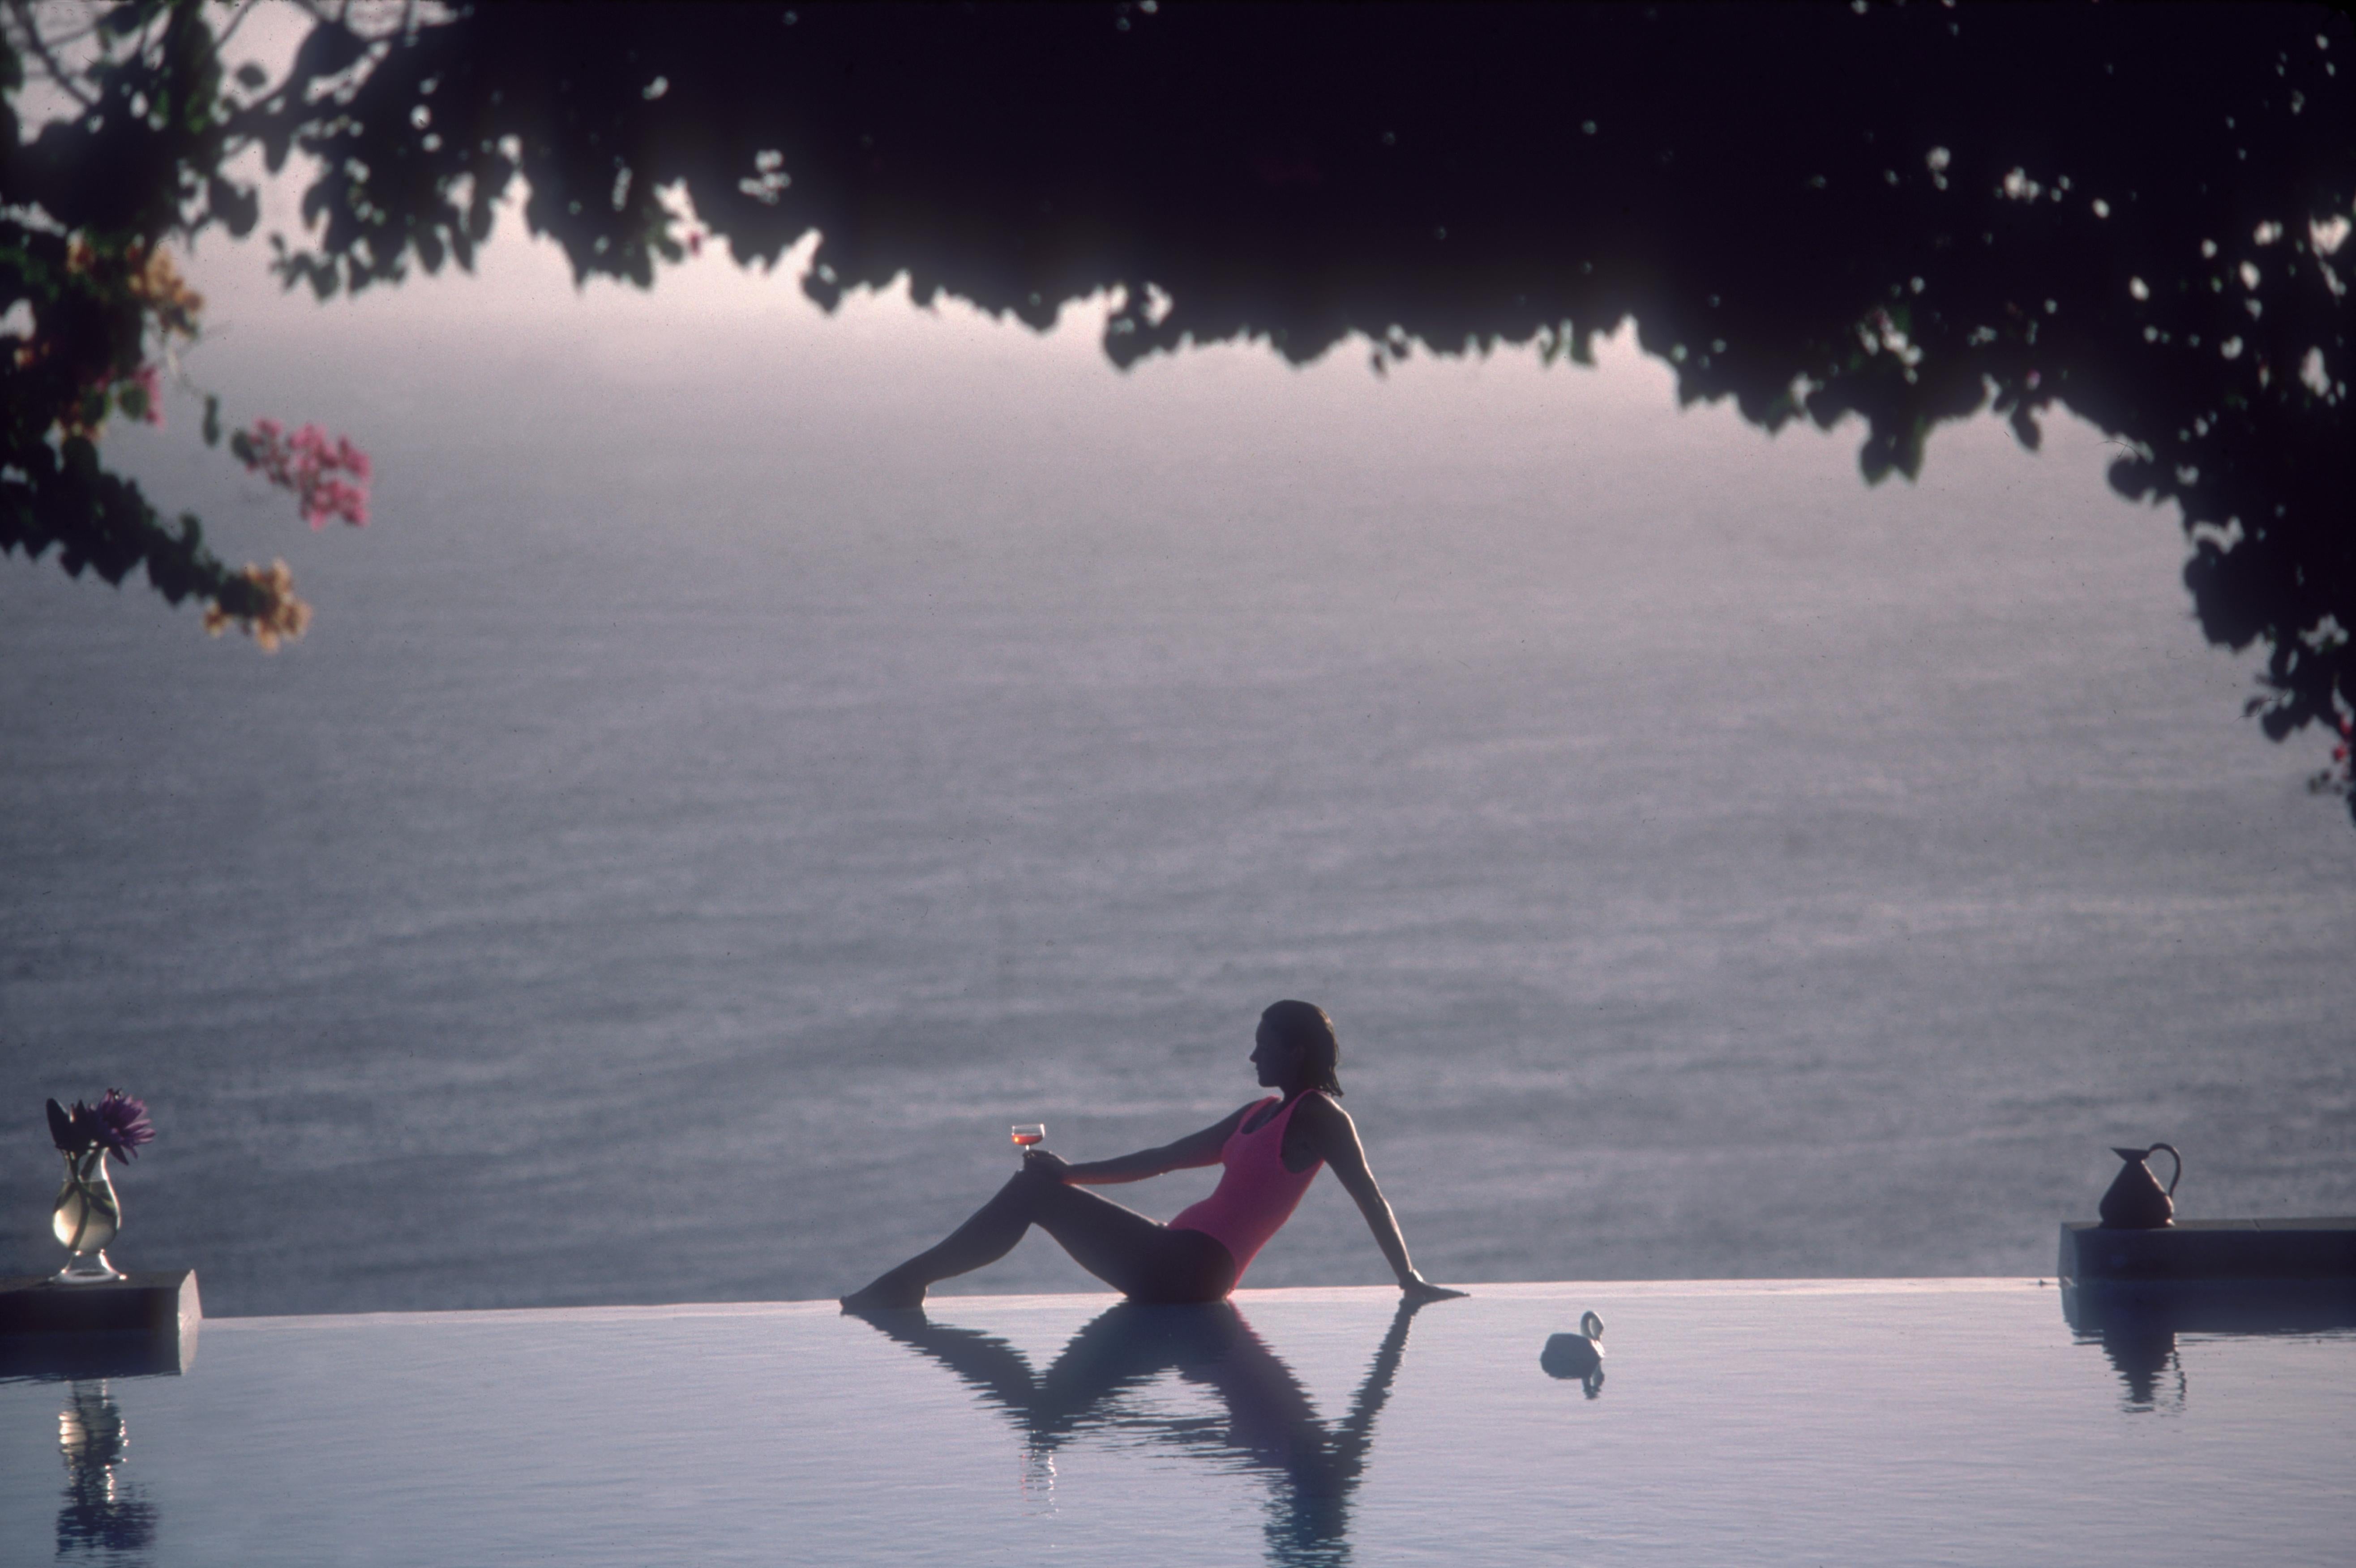 'Water Babe' 1989 Slim Aarons Limited Estate Edition Print 

'Town & Country' writer Meg O'Neil relaxes by the pool on the island of Mustique, in the Grenadines, February 1989.
(Photo by Slim Aarons/Getty Images)

Produced from the original